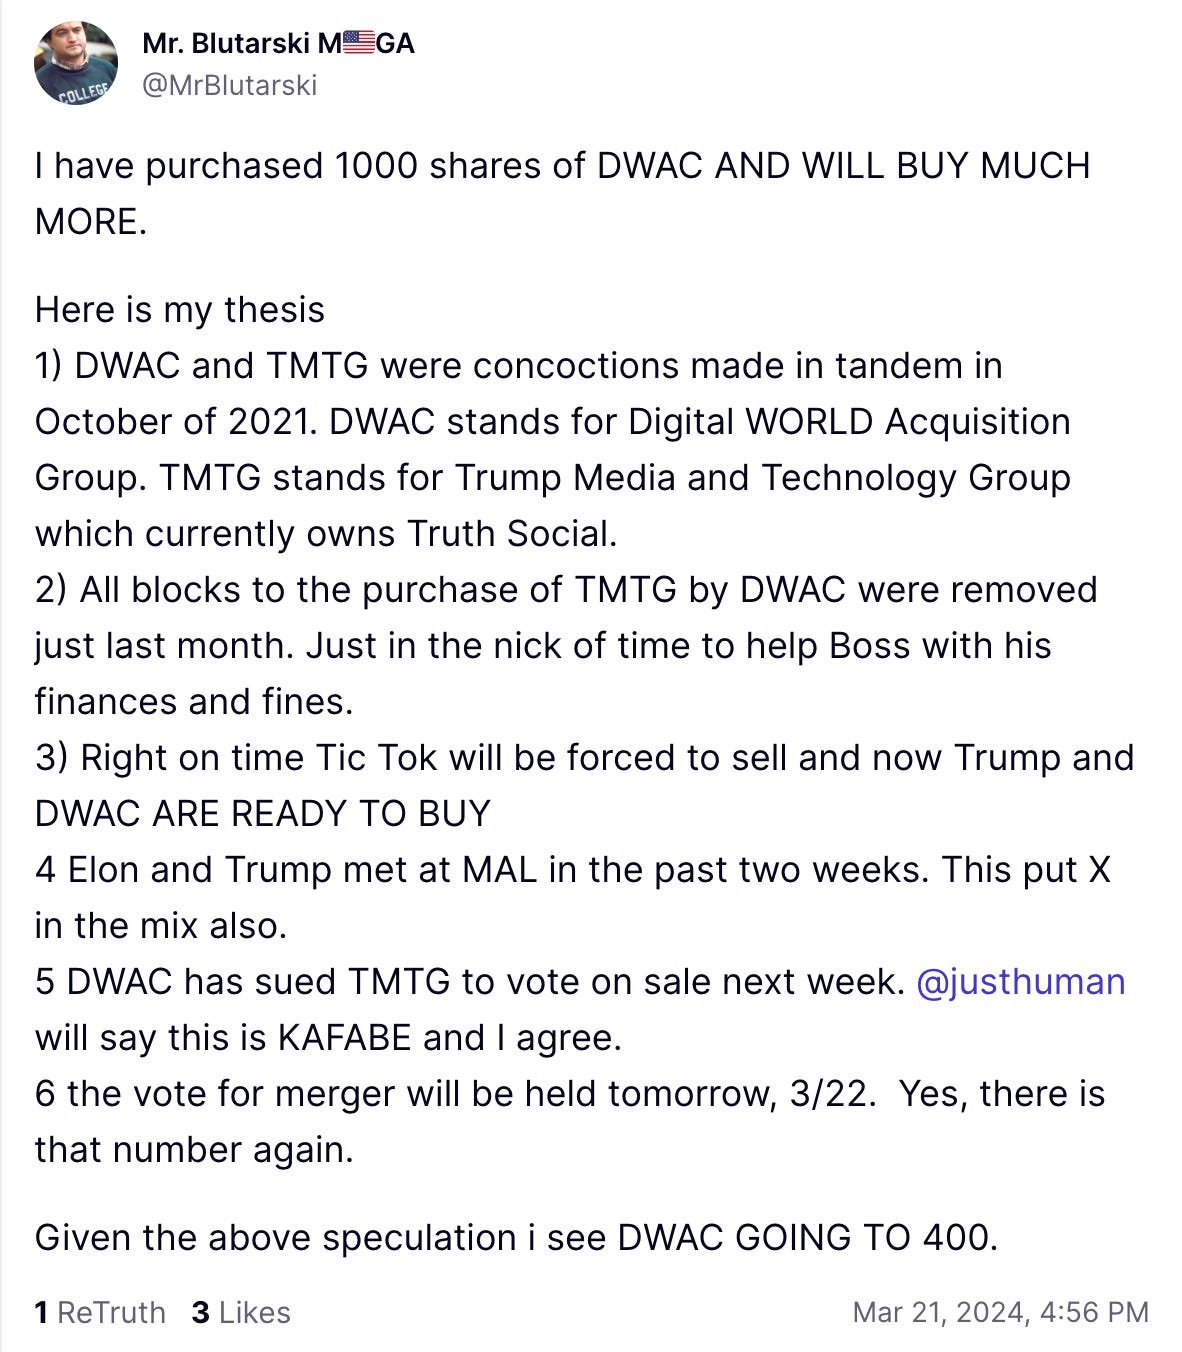 Trending Avatar Mr. Blutarski M🇺🇸GA  @MrBlutarski  I have purchased 1000 shares of DWAC AND WILL BUY MUCH MORE.  Here is my thesis 1) DWAC and TMTG were concoctions made in tandem in October of 2021. DWAC stands for Digital WORLD Acquisition Group. TMTG stands for Trump Media and Technology Group which currently owns Truth Social.  2) All blocks to the purchase of TMTG by DWAC were removed just last month. Just in the nick of time to help Boss with his finances and fines.  3) Right on time Tic Tok will be forced to sell and now Trump and DWAC ARE READY TO BUY 4 Elon and Trump met at MAL in the past two weeks. This put X in the mix also.  5 DWAC has sued TMTG to vote on sale next week. @justhuman will say this is KAFABE and I agree.   6 the vote for merger will be held tomorrow, 3/22.  Yes, there is that number again.   Given the above speculation i see DWAC GOING TO 400.